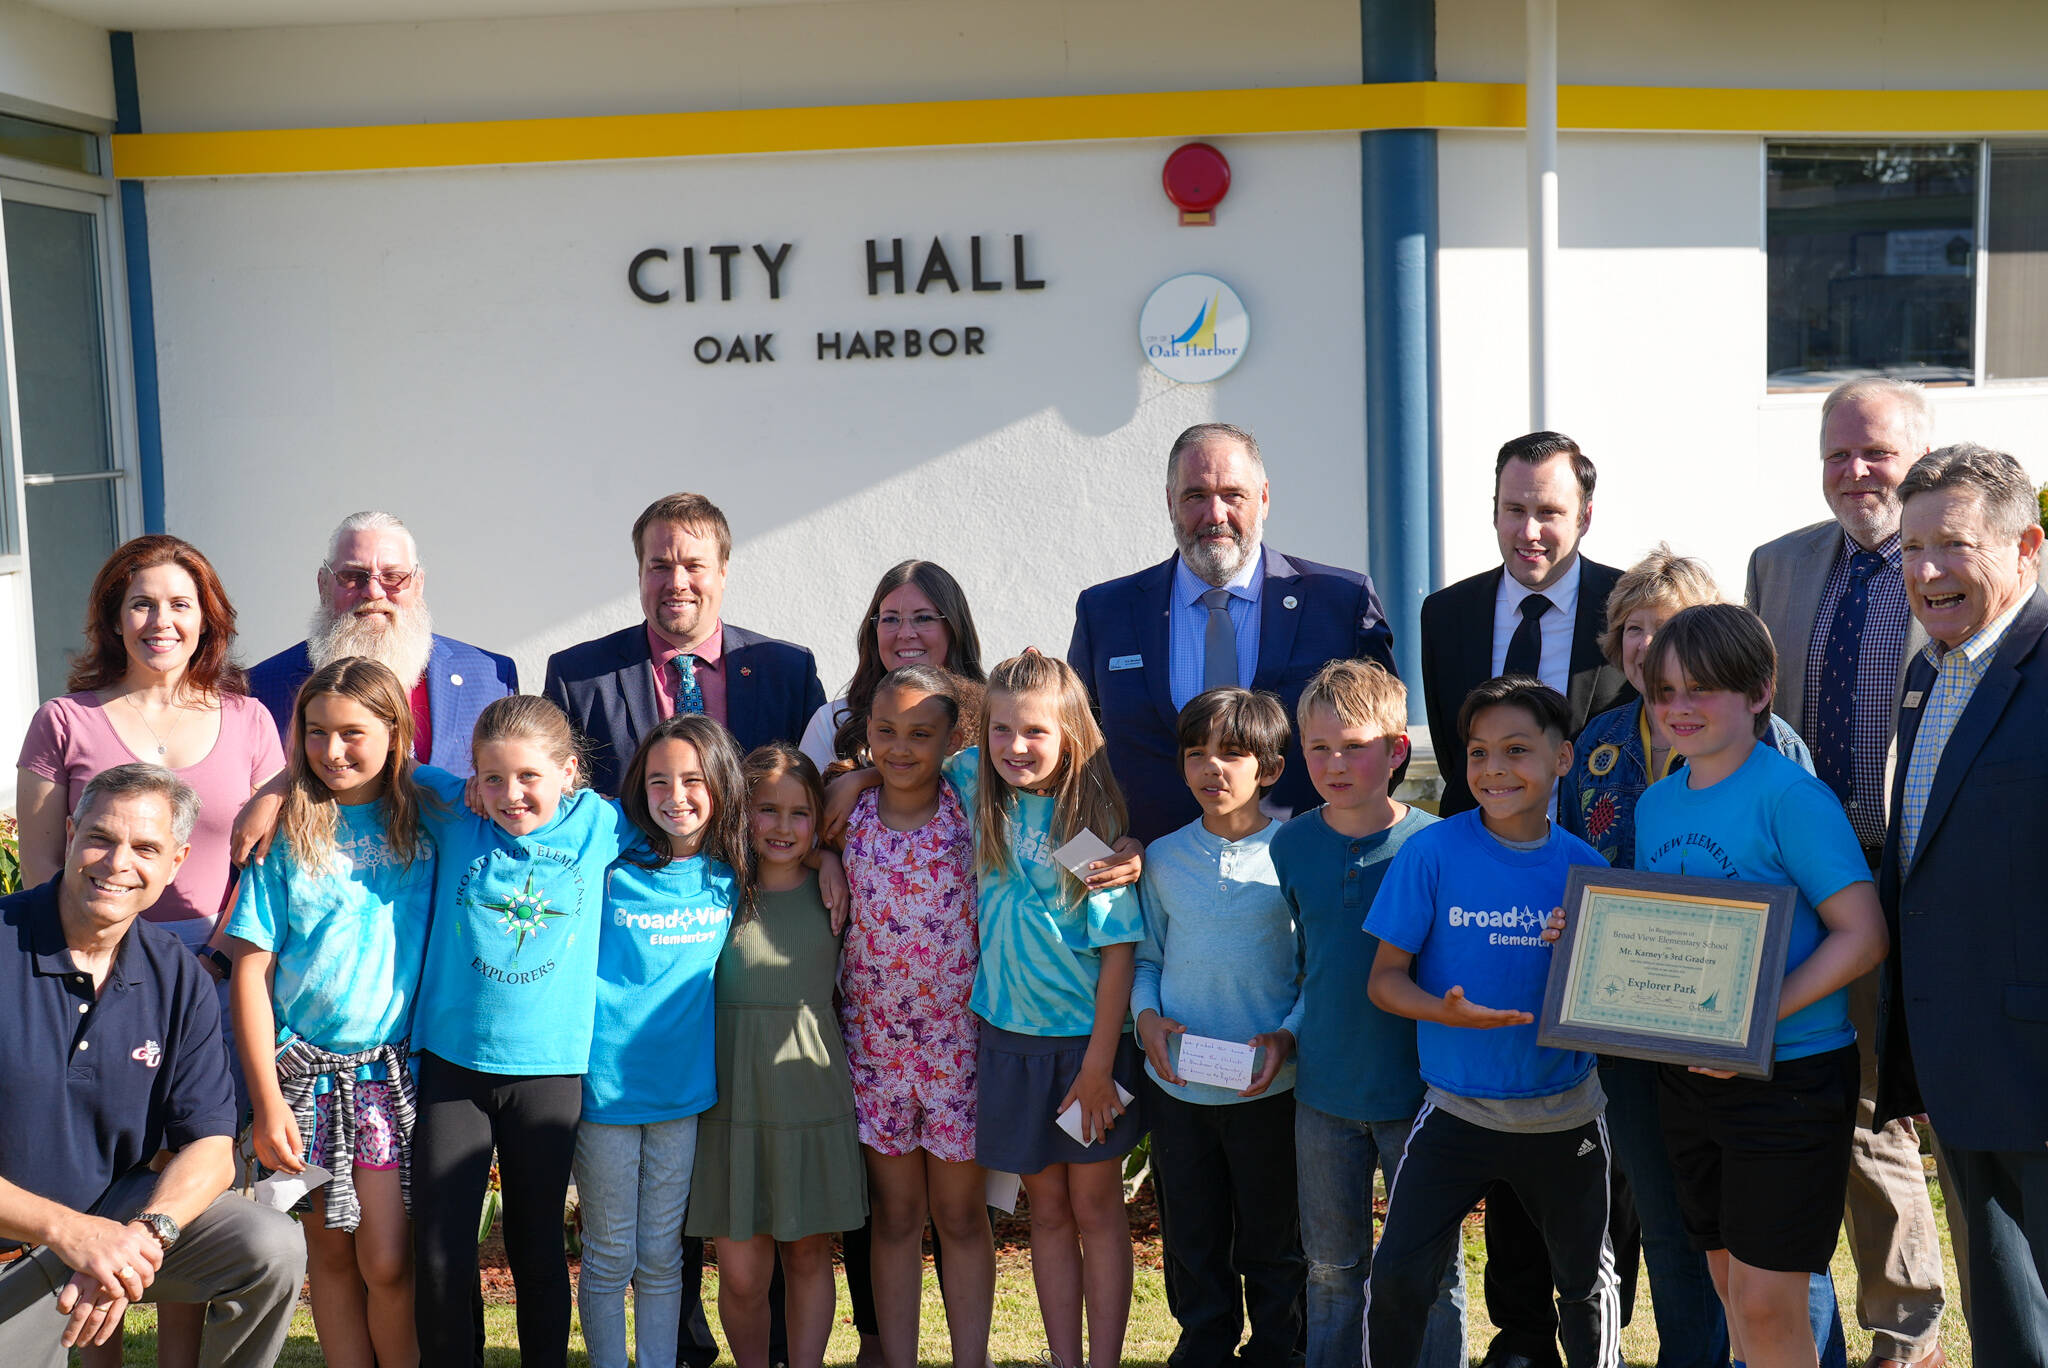 Oak Harbor City Council members present an award of recognition to a Broadview Elementary School third grade class, which submitted the winning name for a new park in the city. (Photo provided)